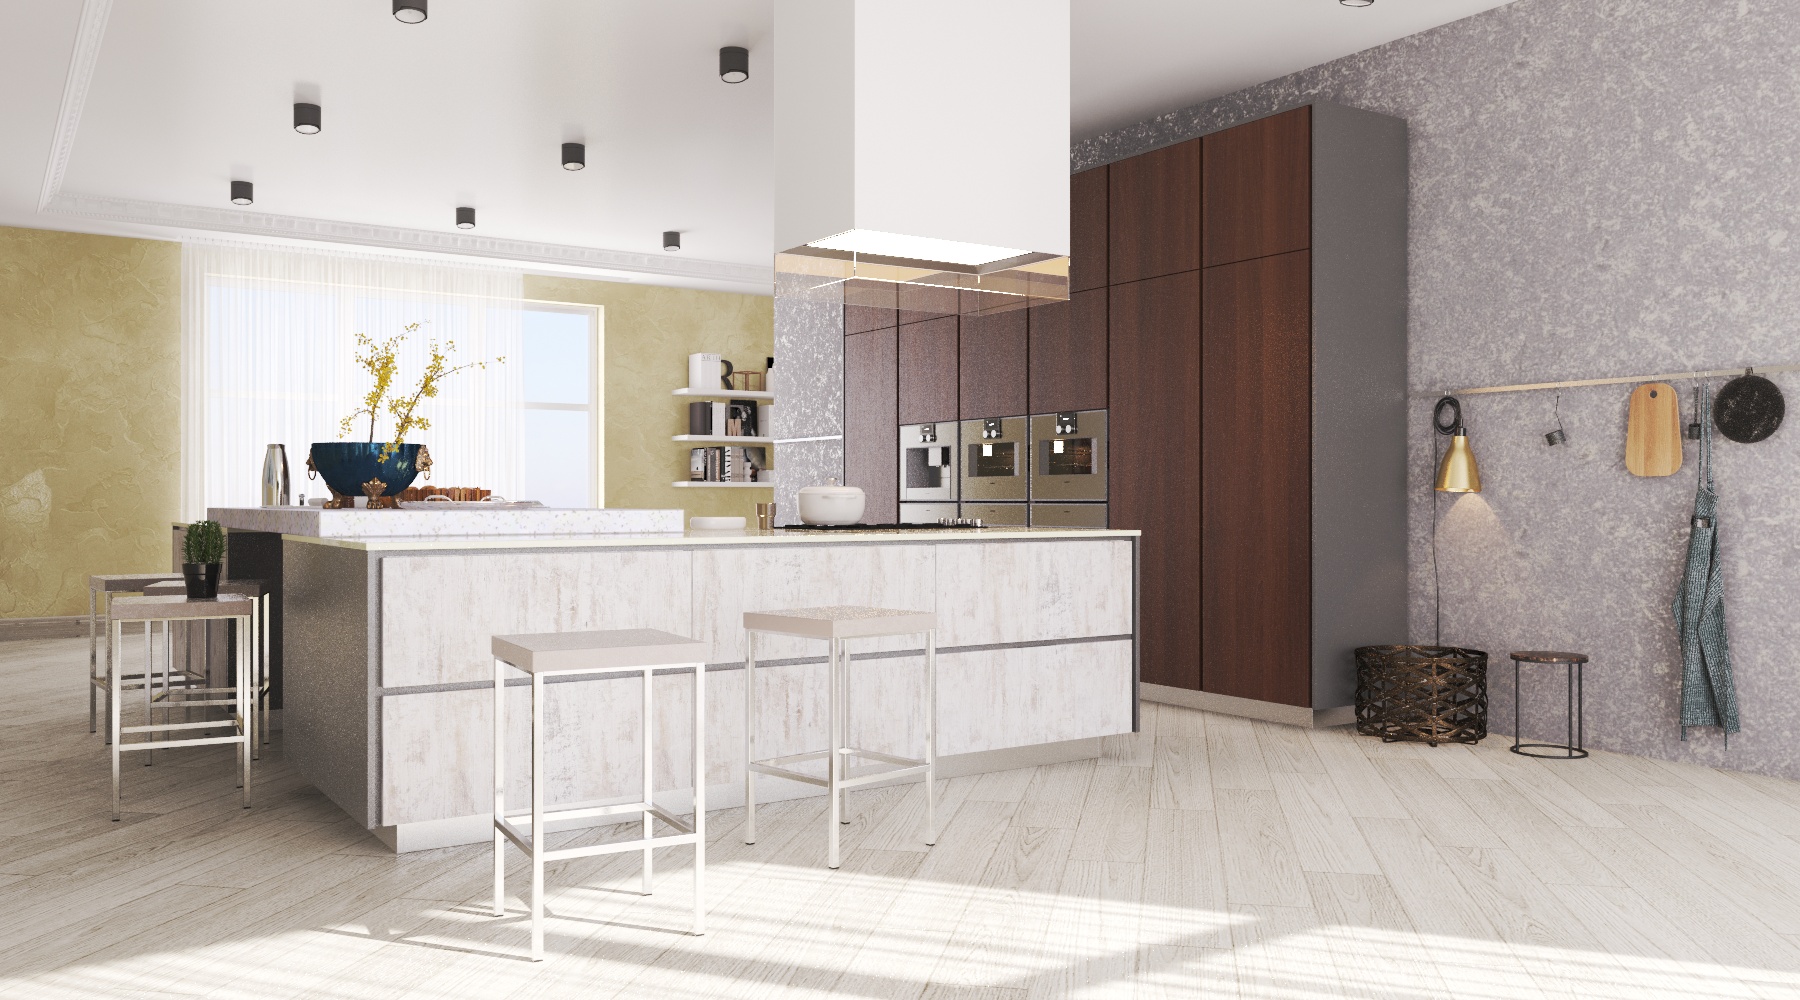 Modern Kitchen in 3d max vray 3.0 image